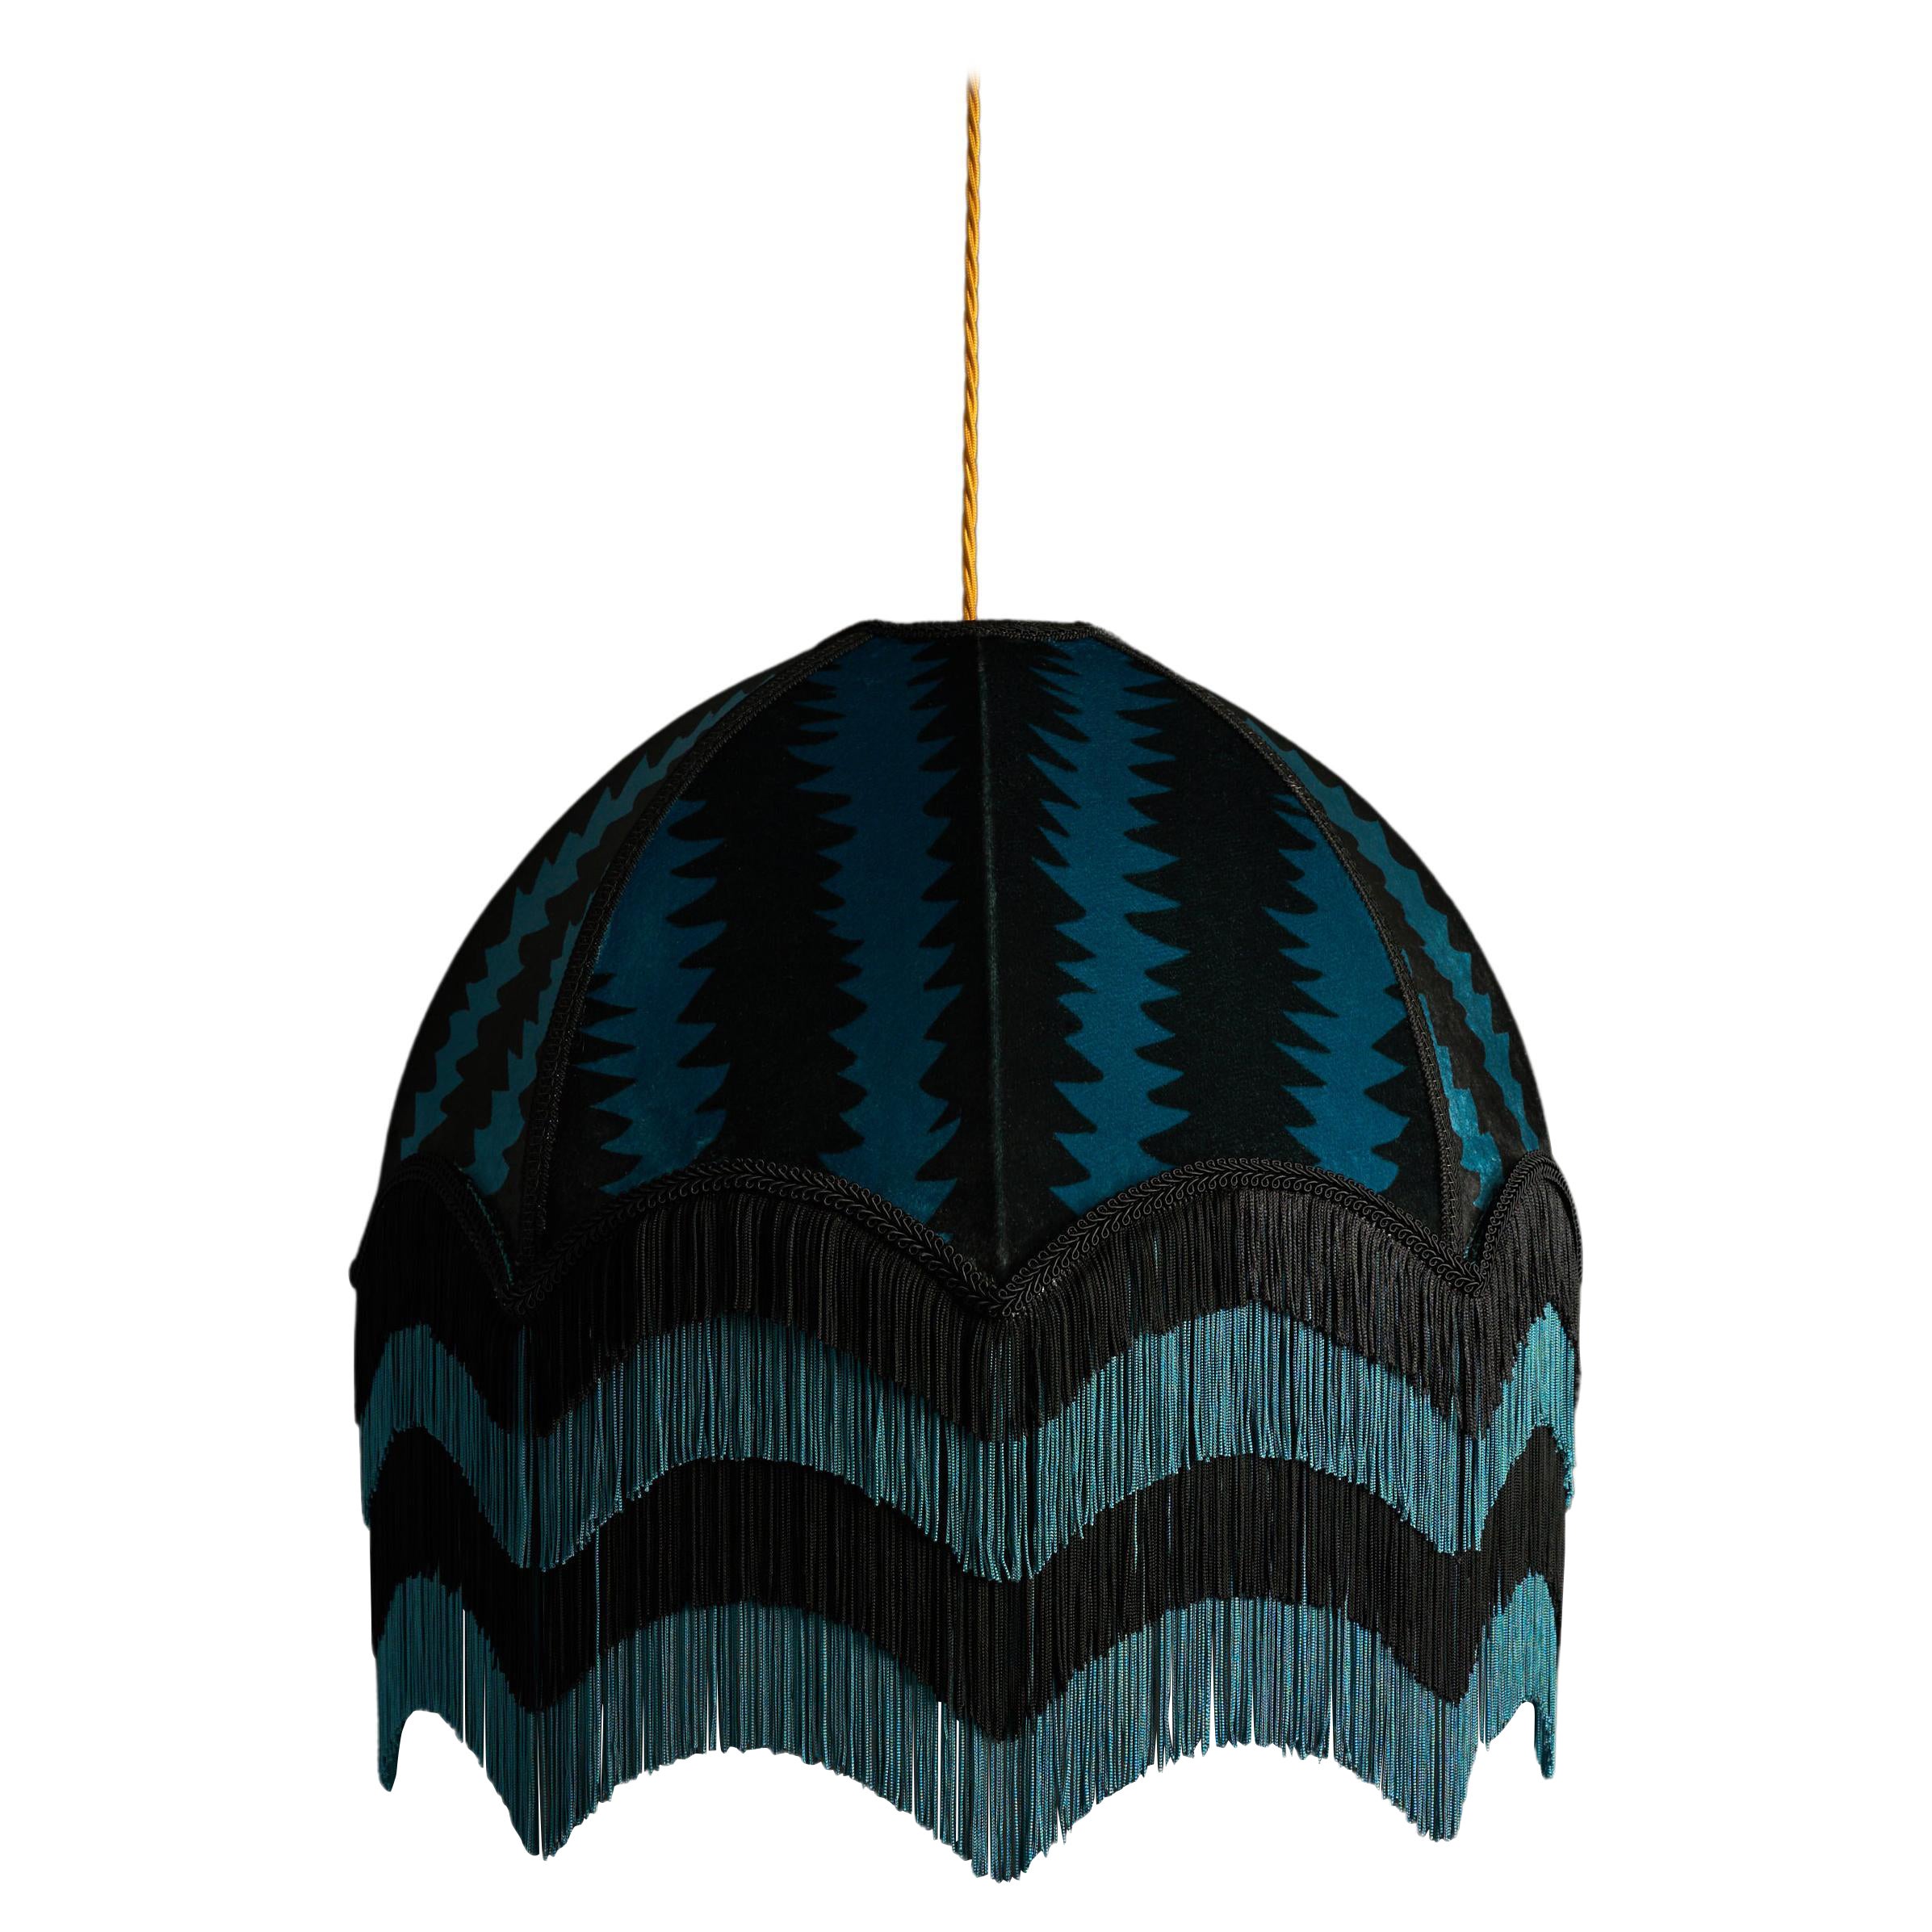 Fitz Lampshade with Fringing - Large (18") For Sale